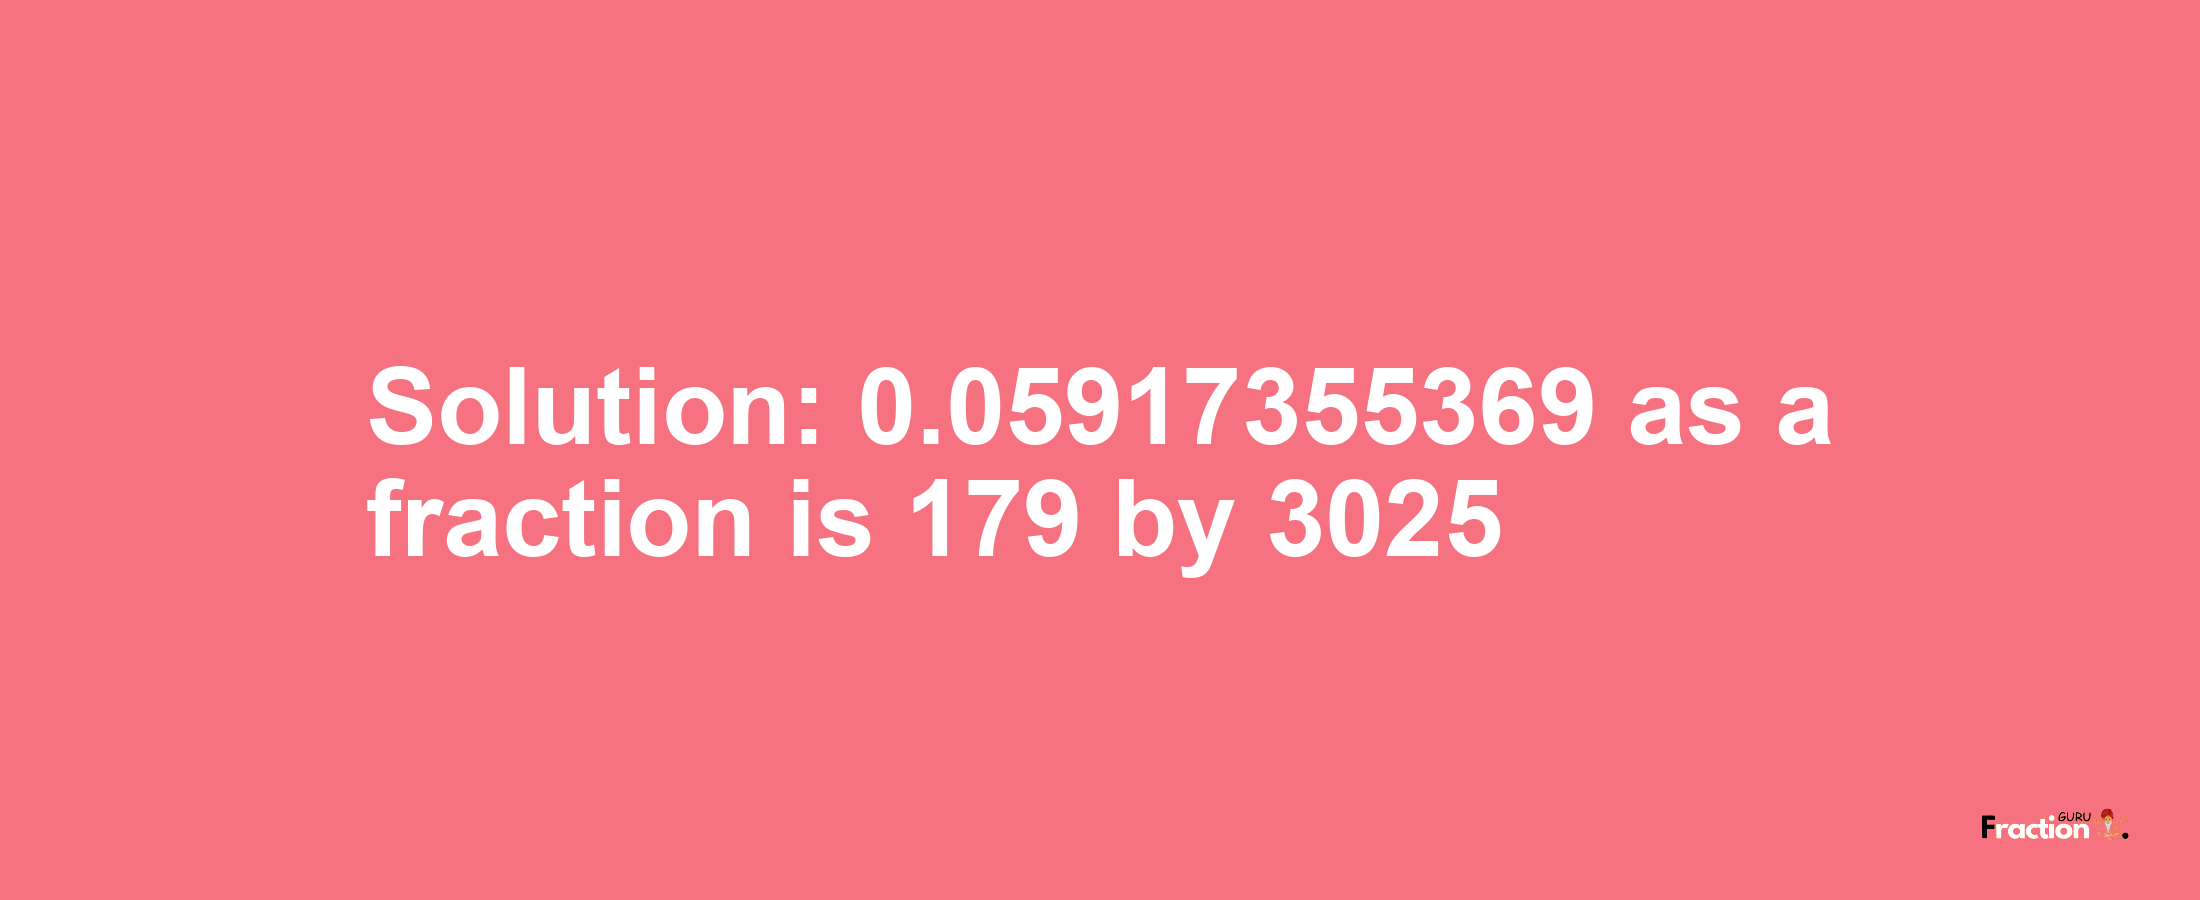 Solution:0.05917355369 as a fraction is 179/3025